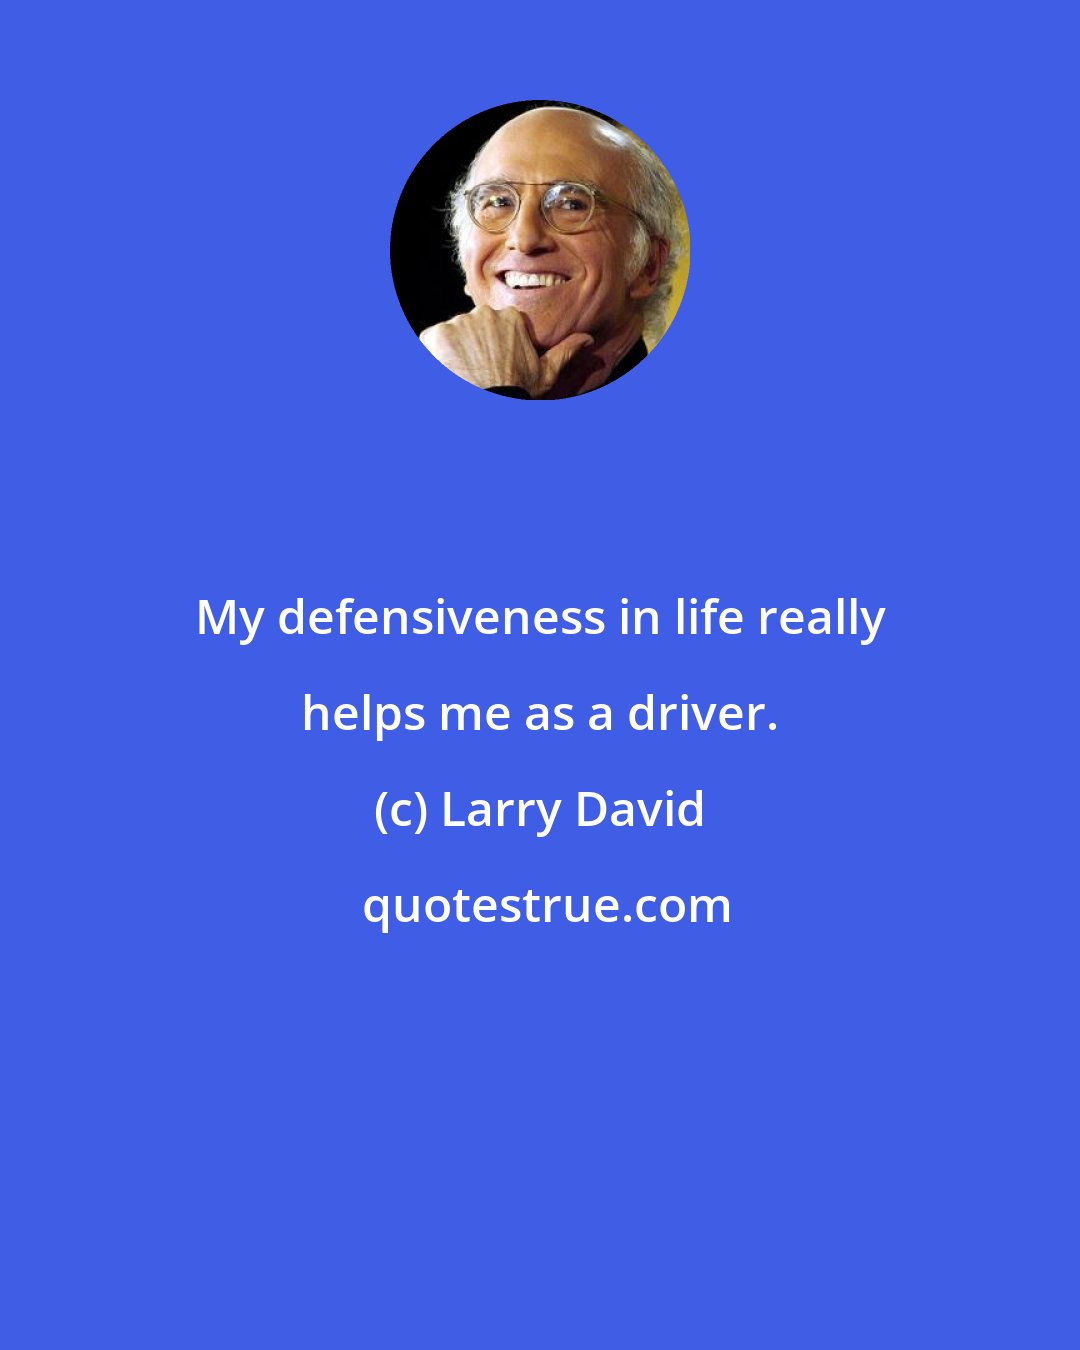 Larry David: My defensiveness in life really helps me as a driver.